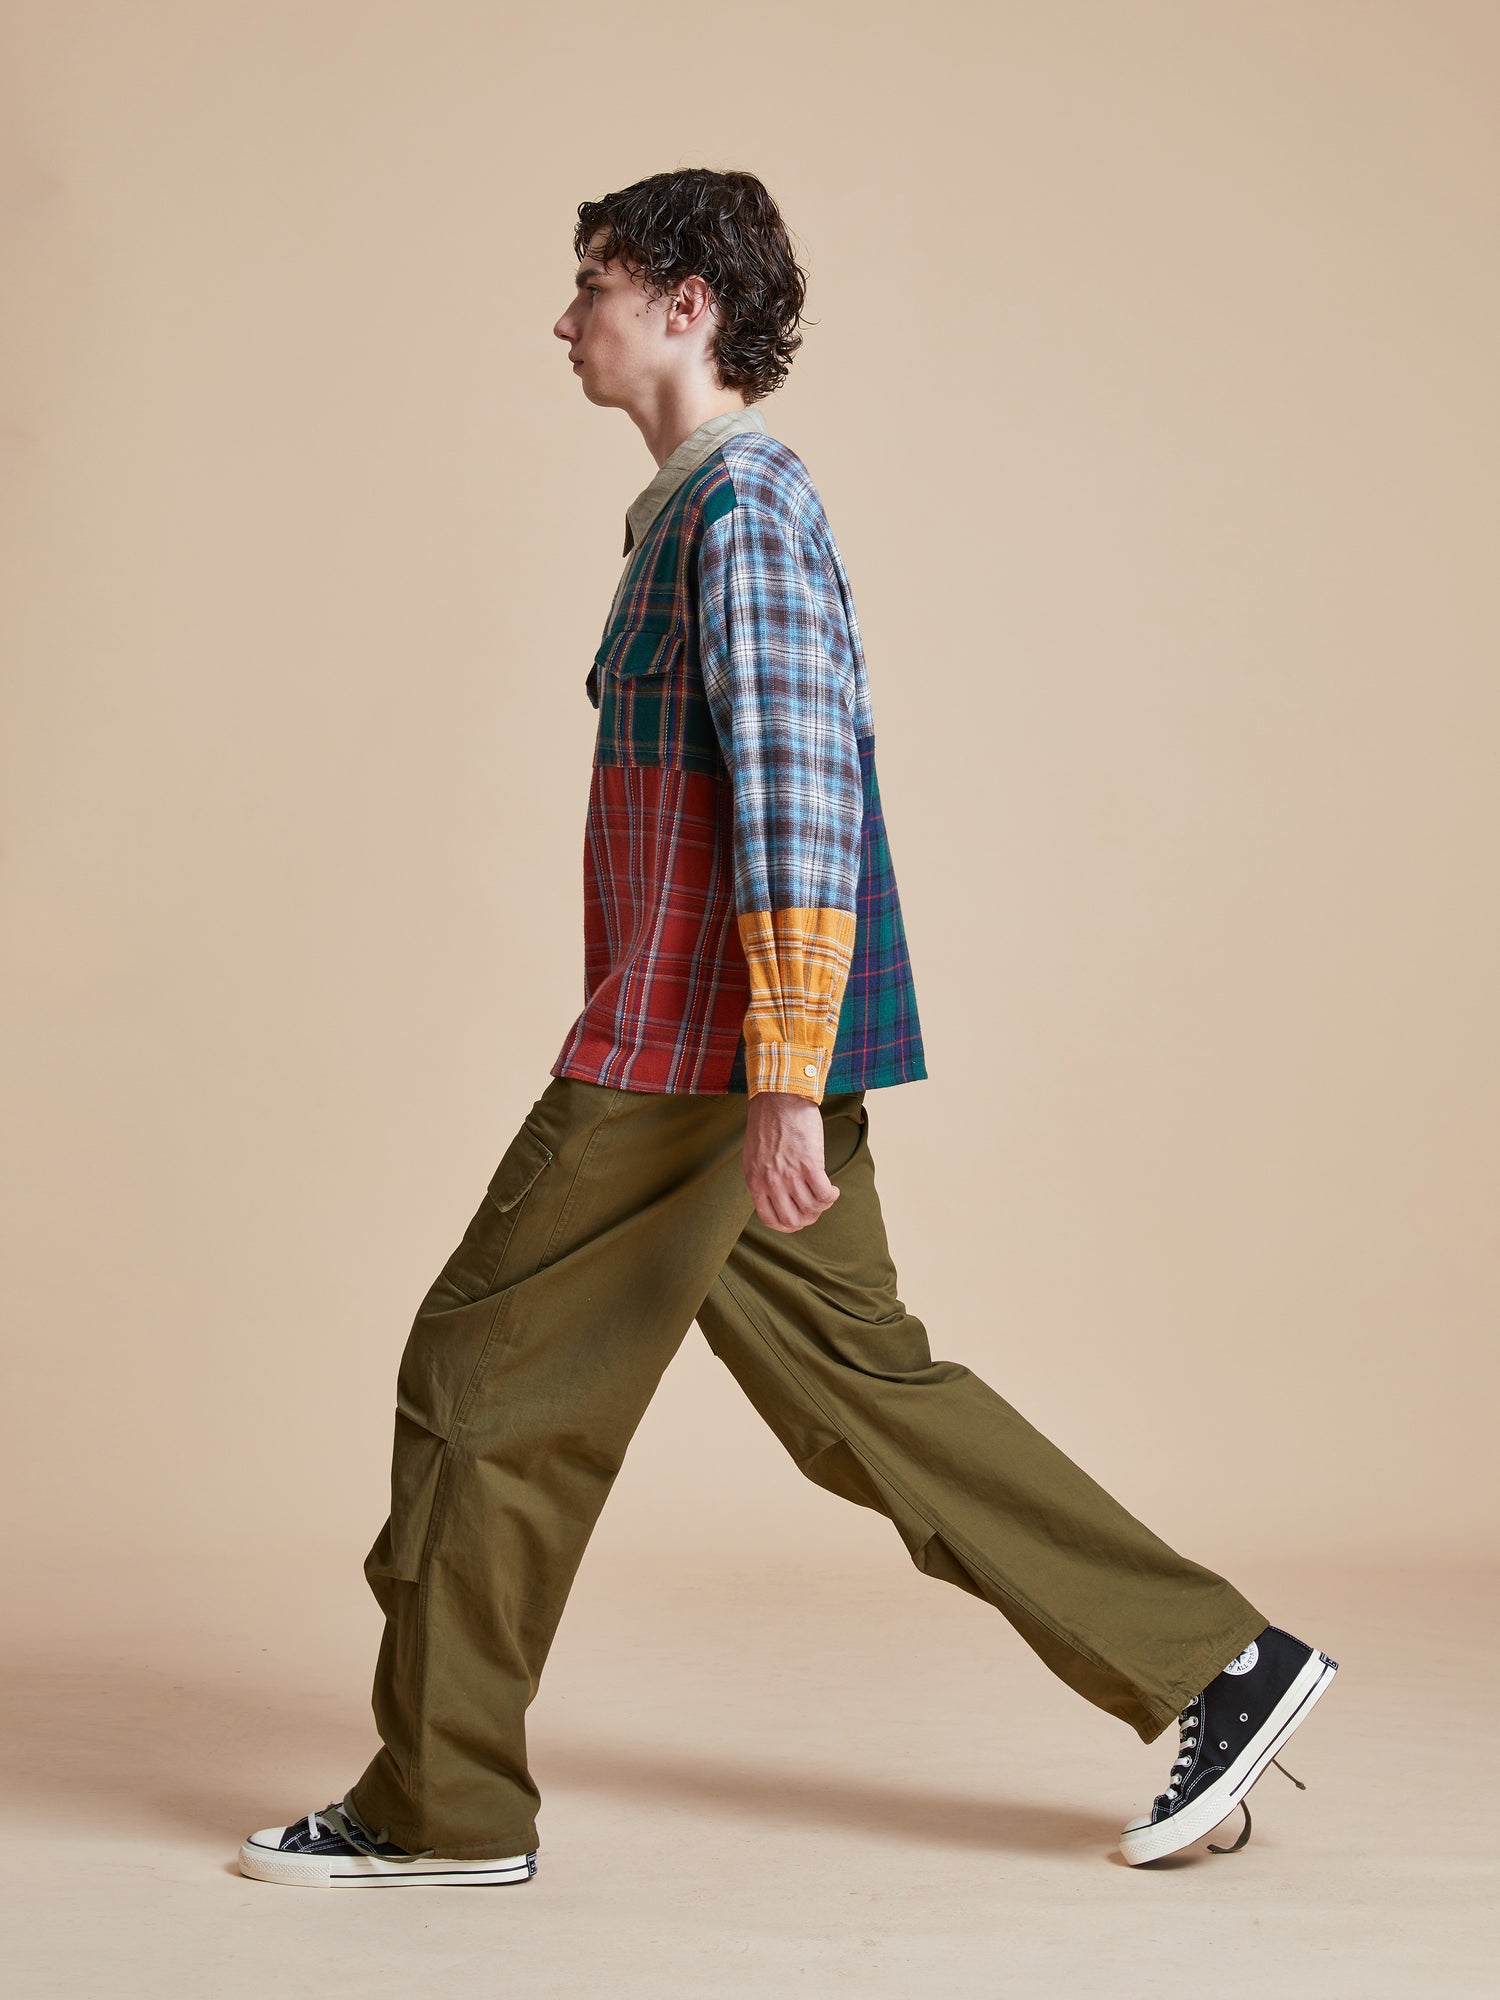 A man is walking in a Multi Plaid Tartan Shirt by Found and sneakers.